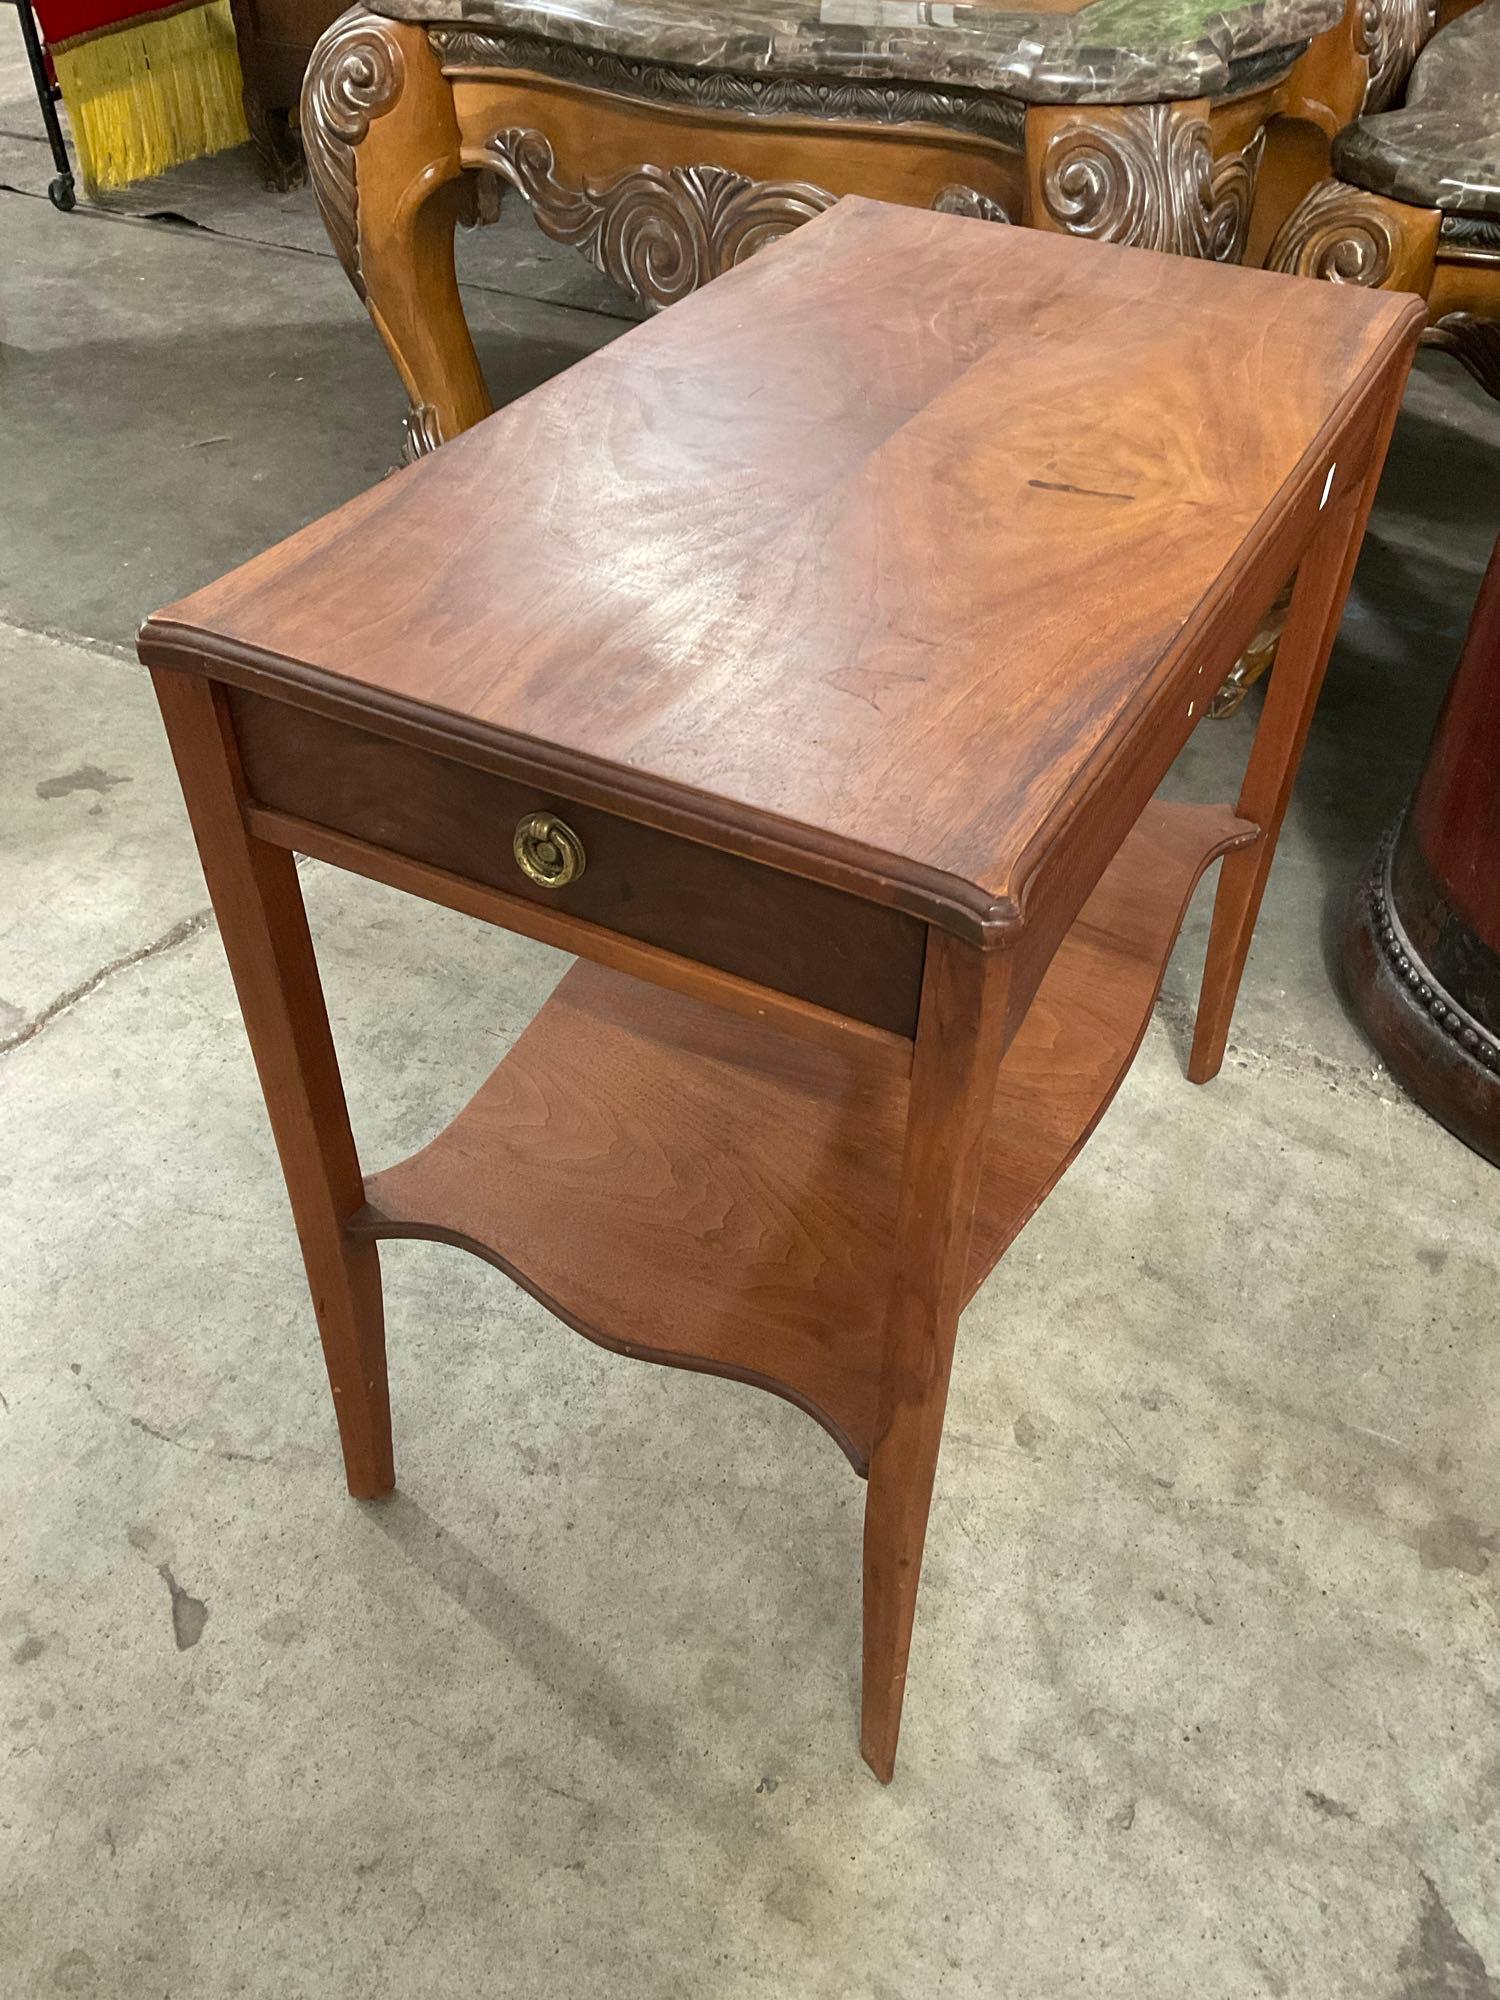 Vintage Deilcraft Fine Furniture Wooden Side Table w/ 2 Tiers, Drawer & Beautiful Grain. See pics.